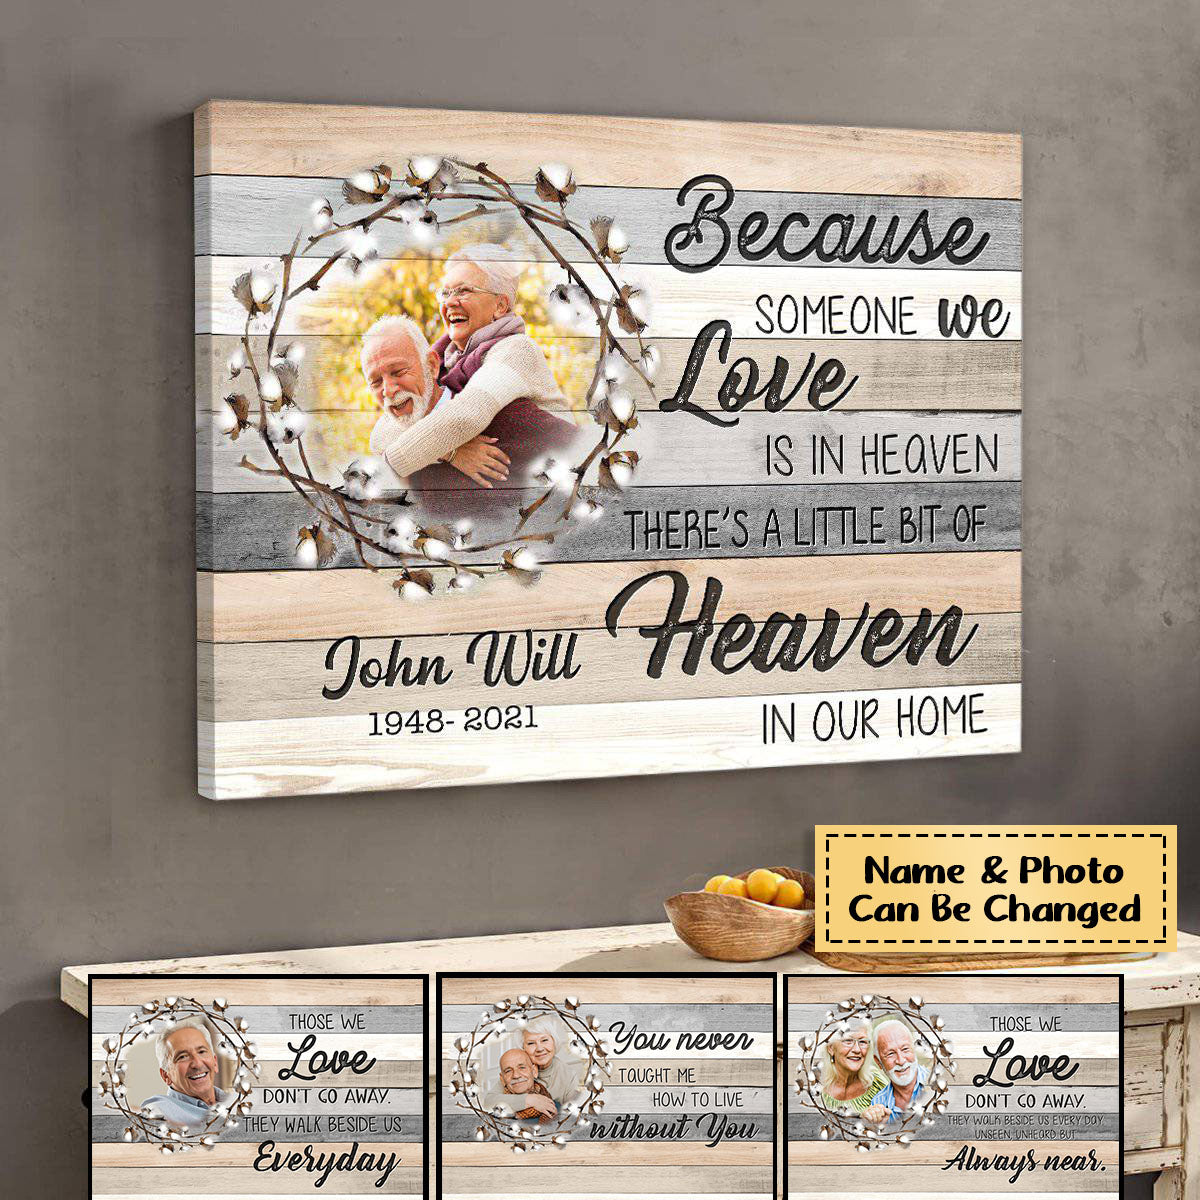 Because Someone We Love is in heaven - Memorial Mom/ Grandma/ Family Personalized Poster